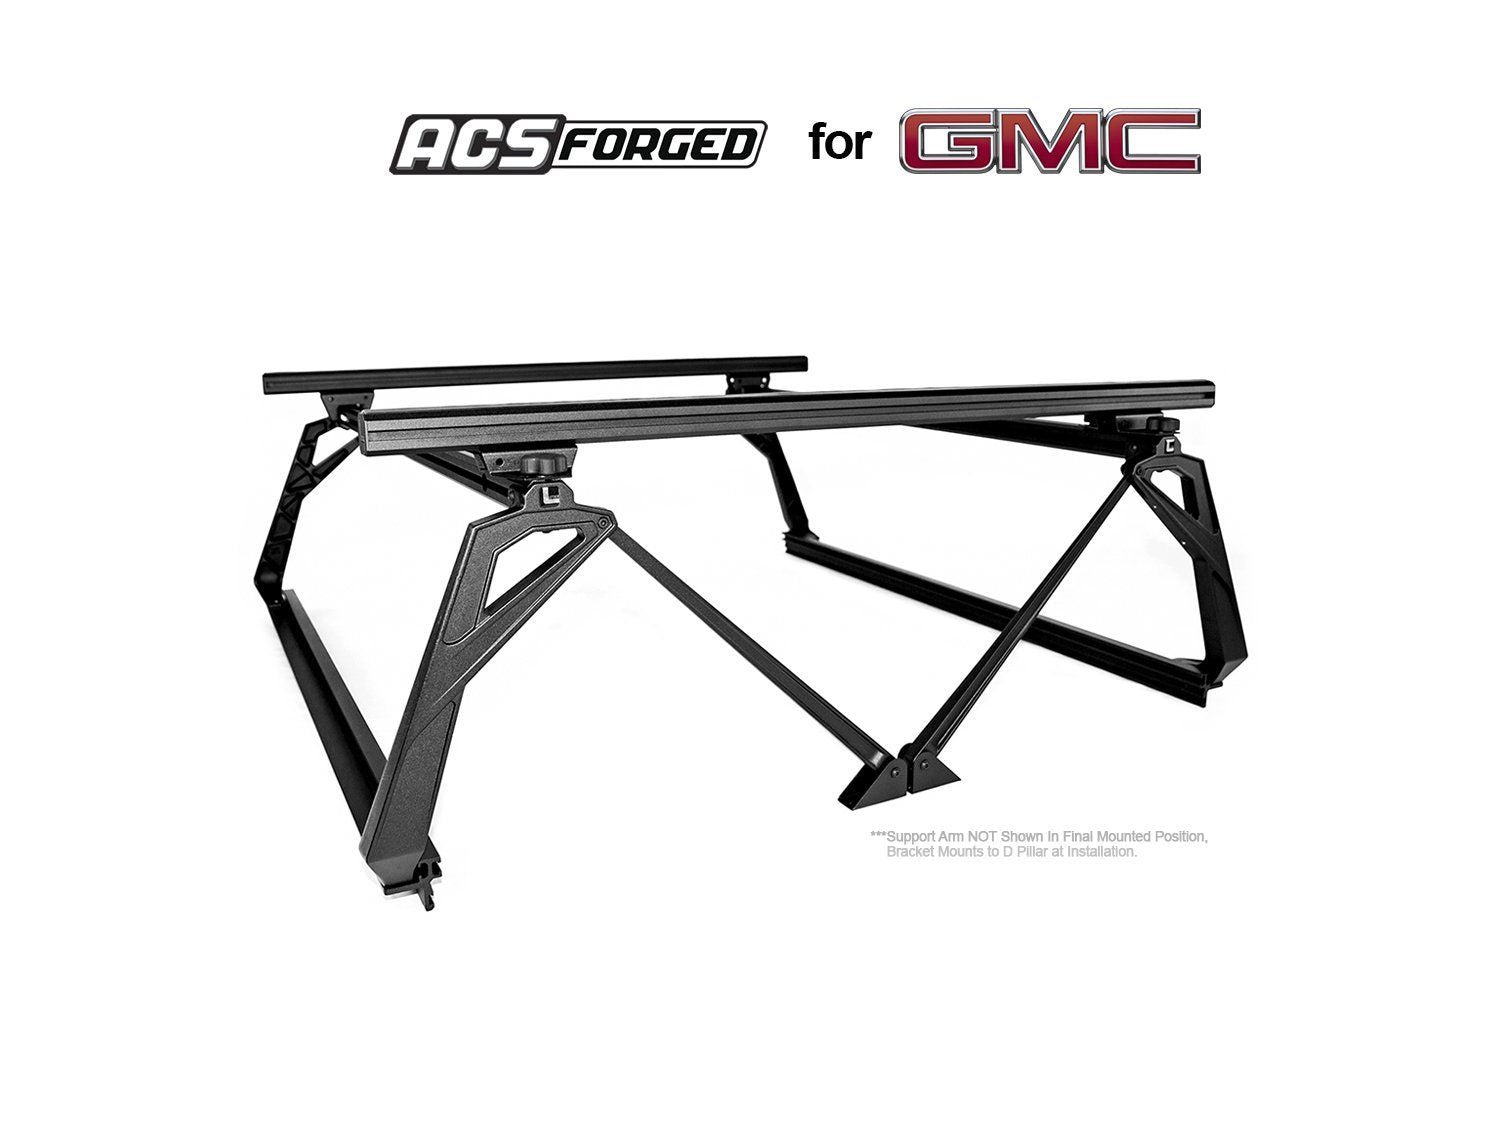 '07-22 Chevy/GMC 2500/3500HD-ACS Forged Bed Accessories Leitner Designs display